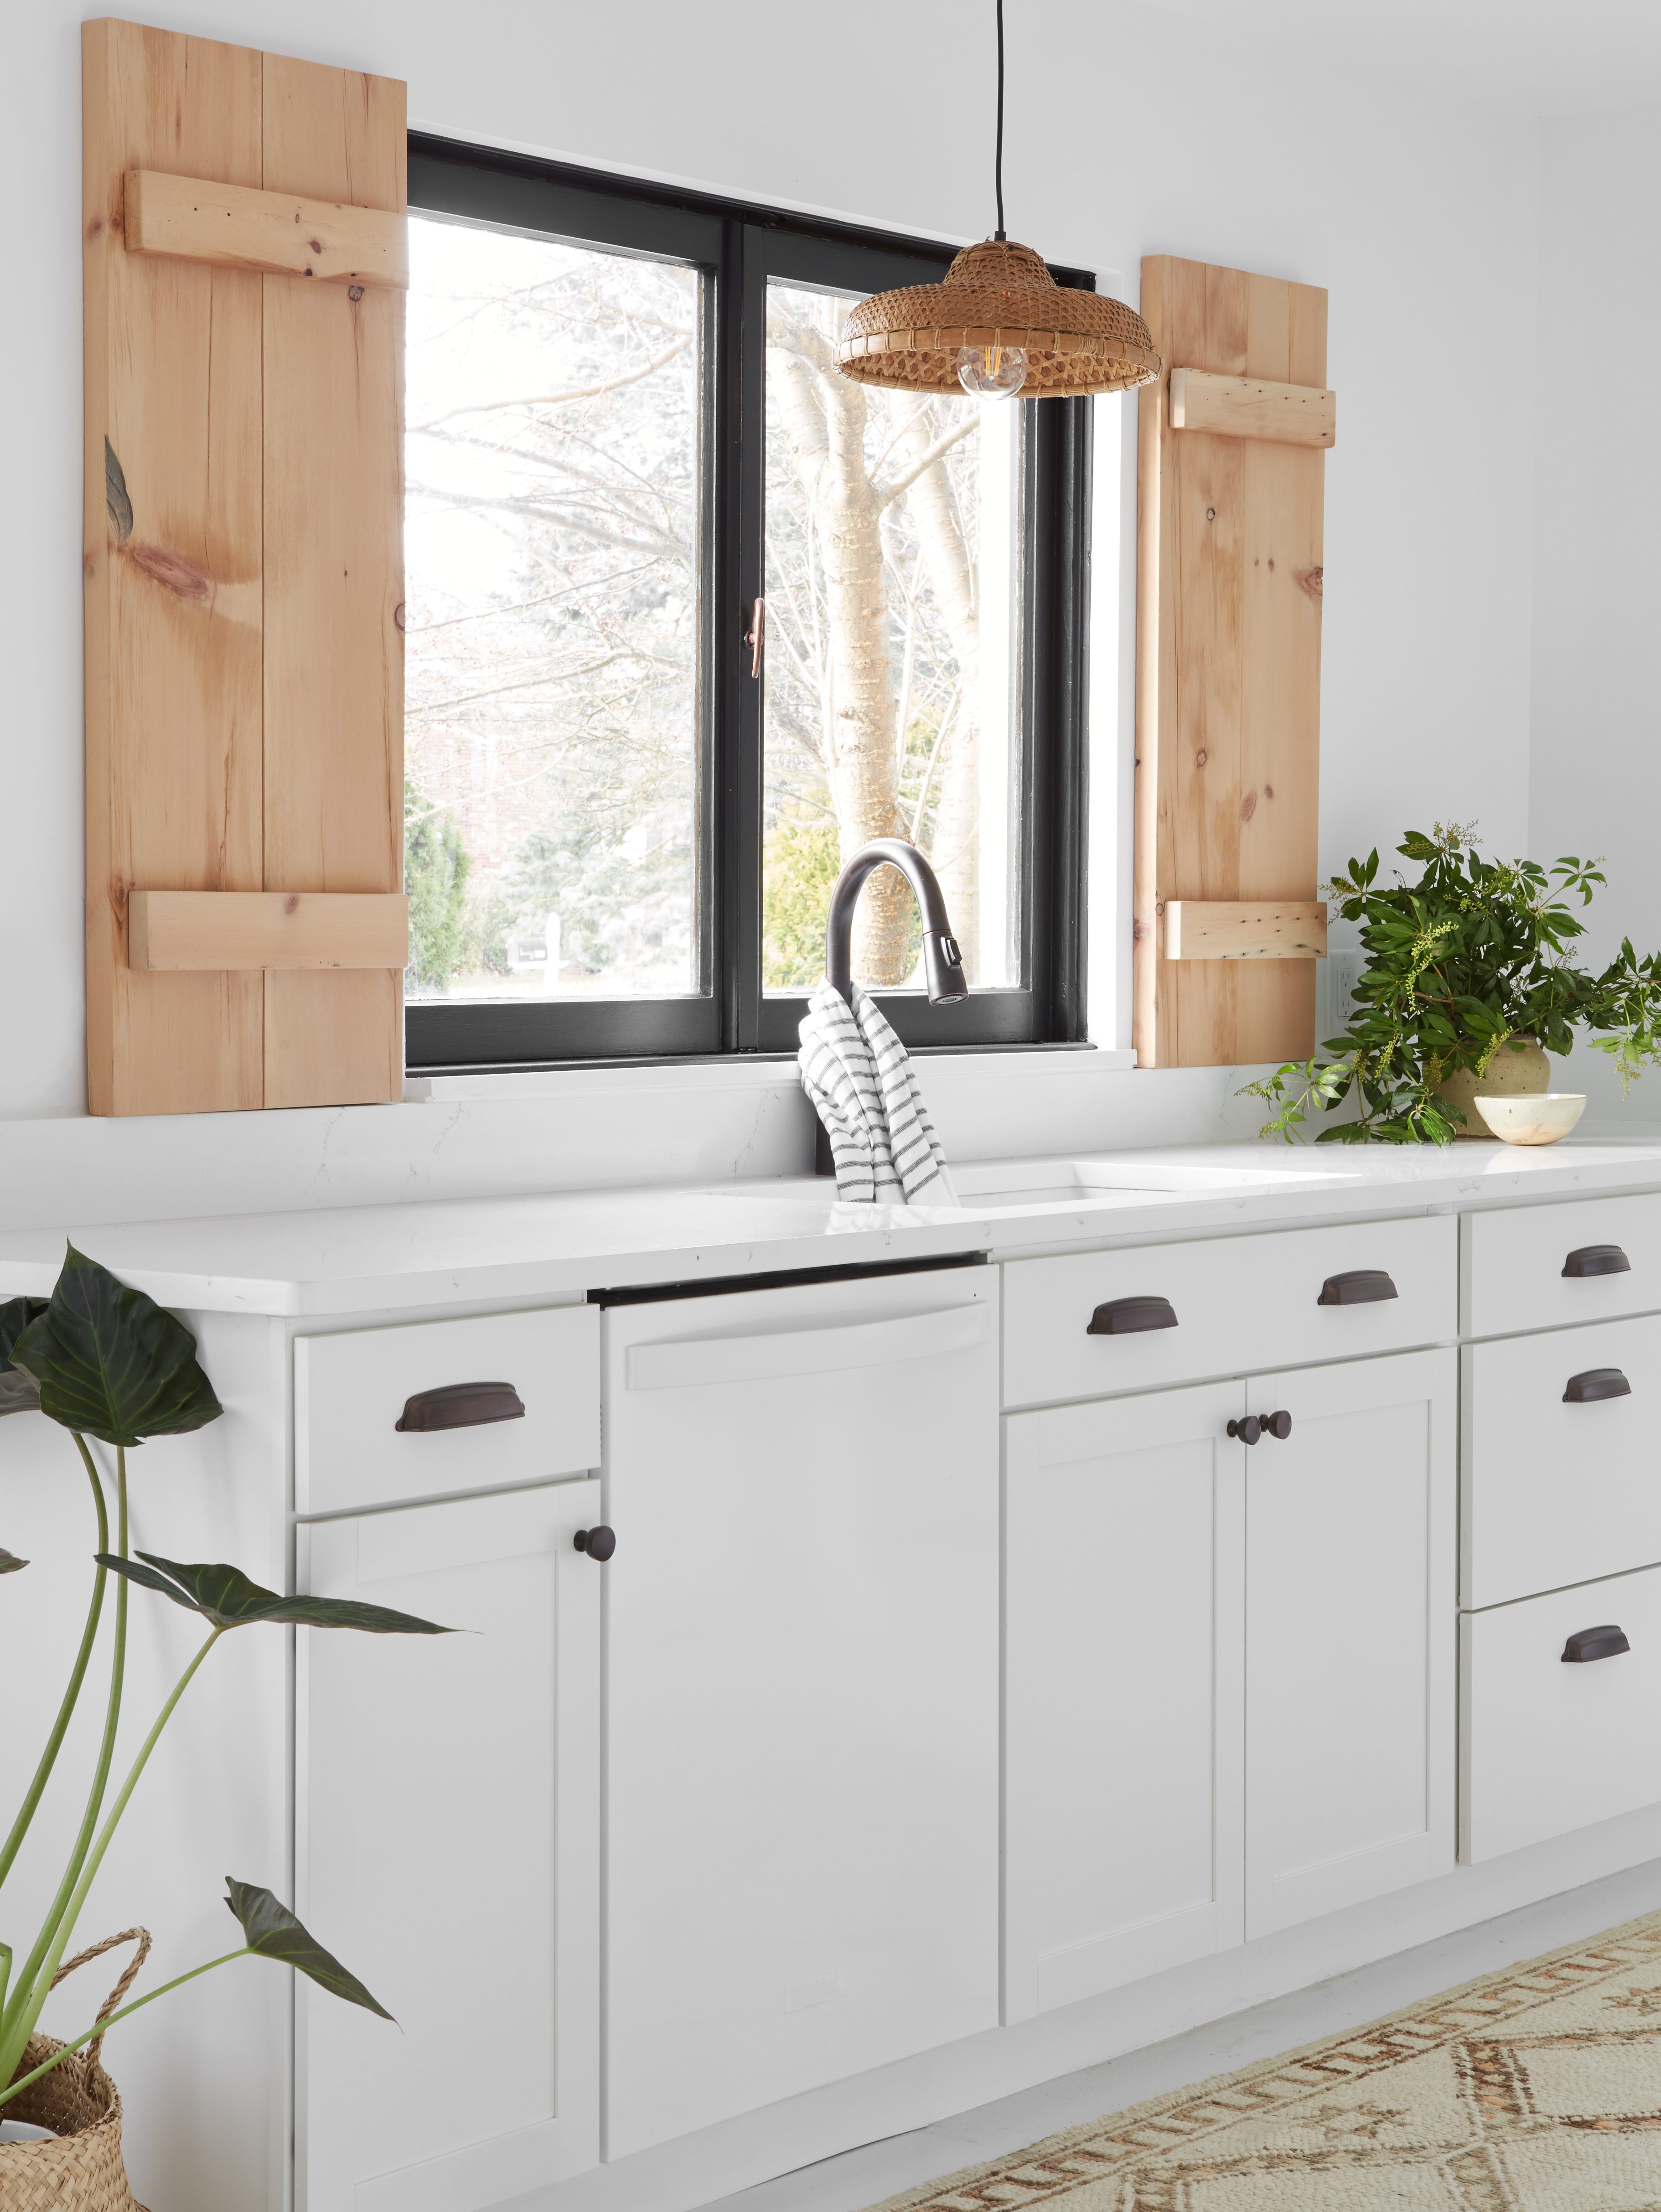 white kitchen sink area with raw wood shutters by the window